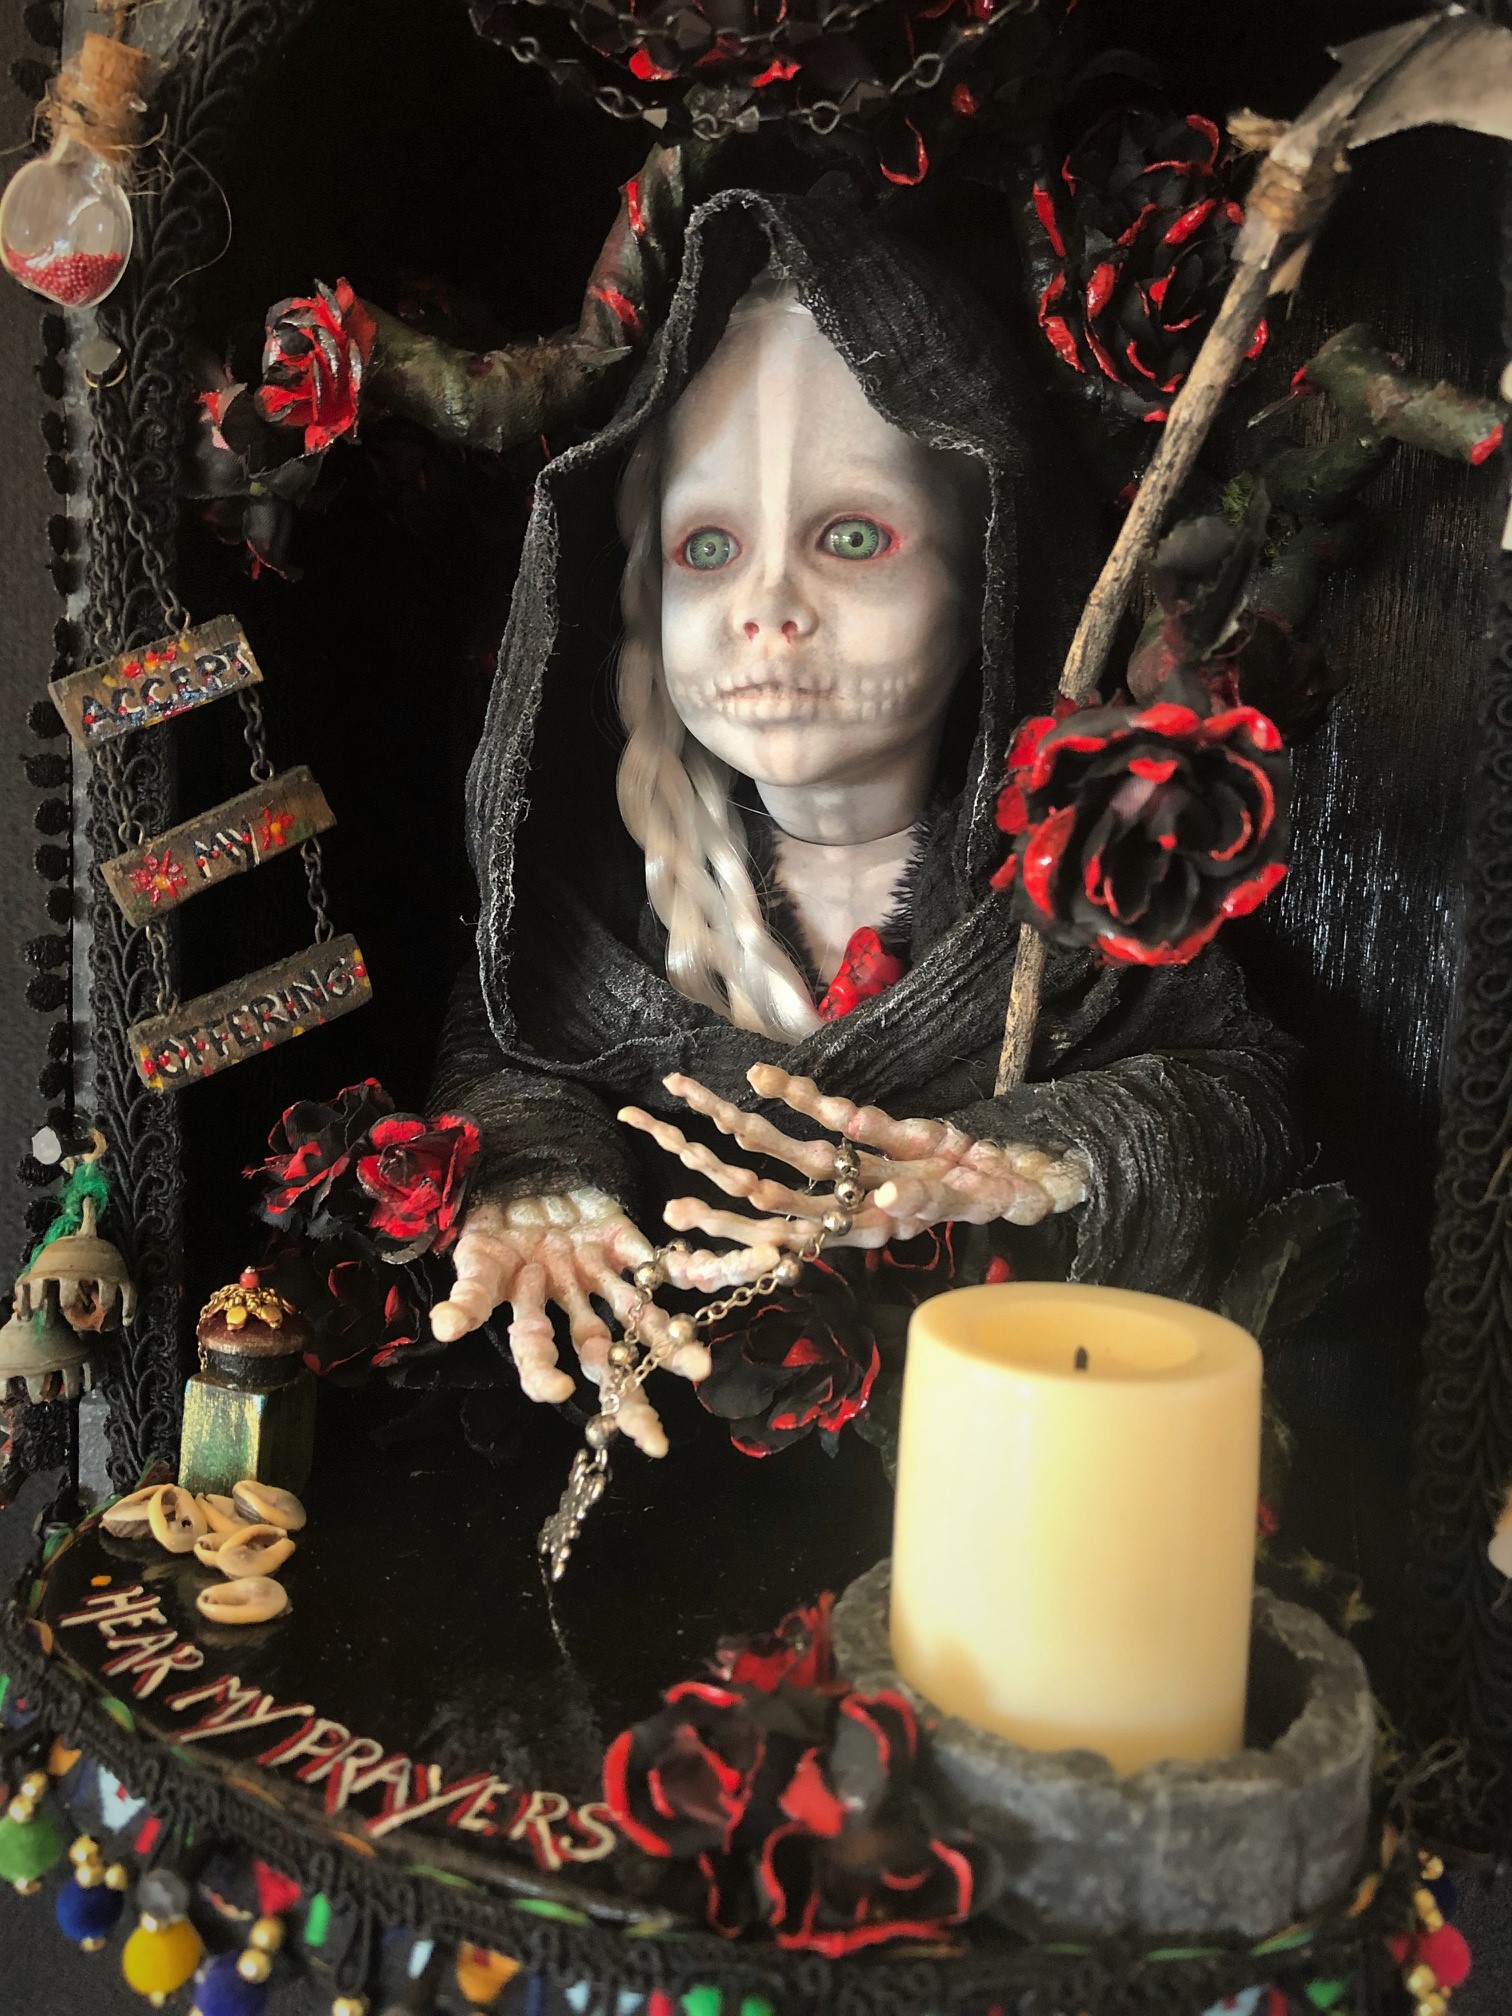 close up of Santa Muerte altar box and nightlight mixed media assemblage candle